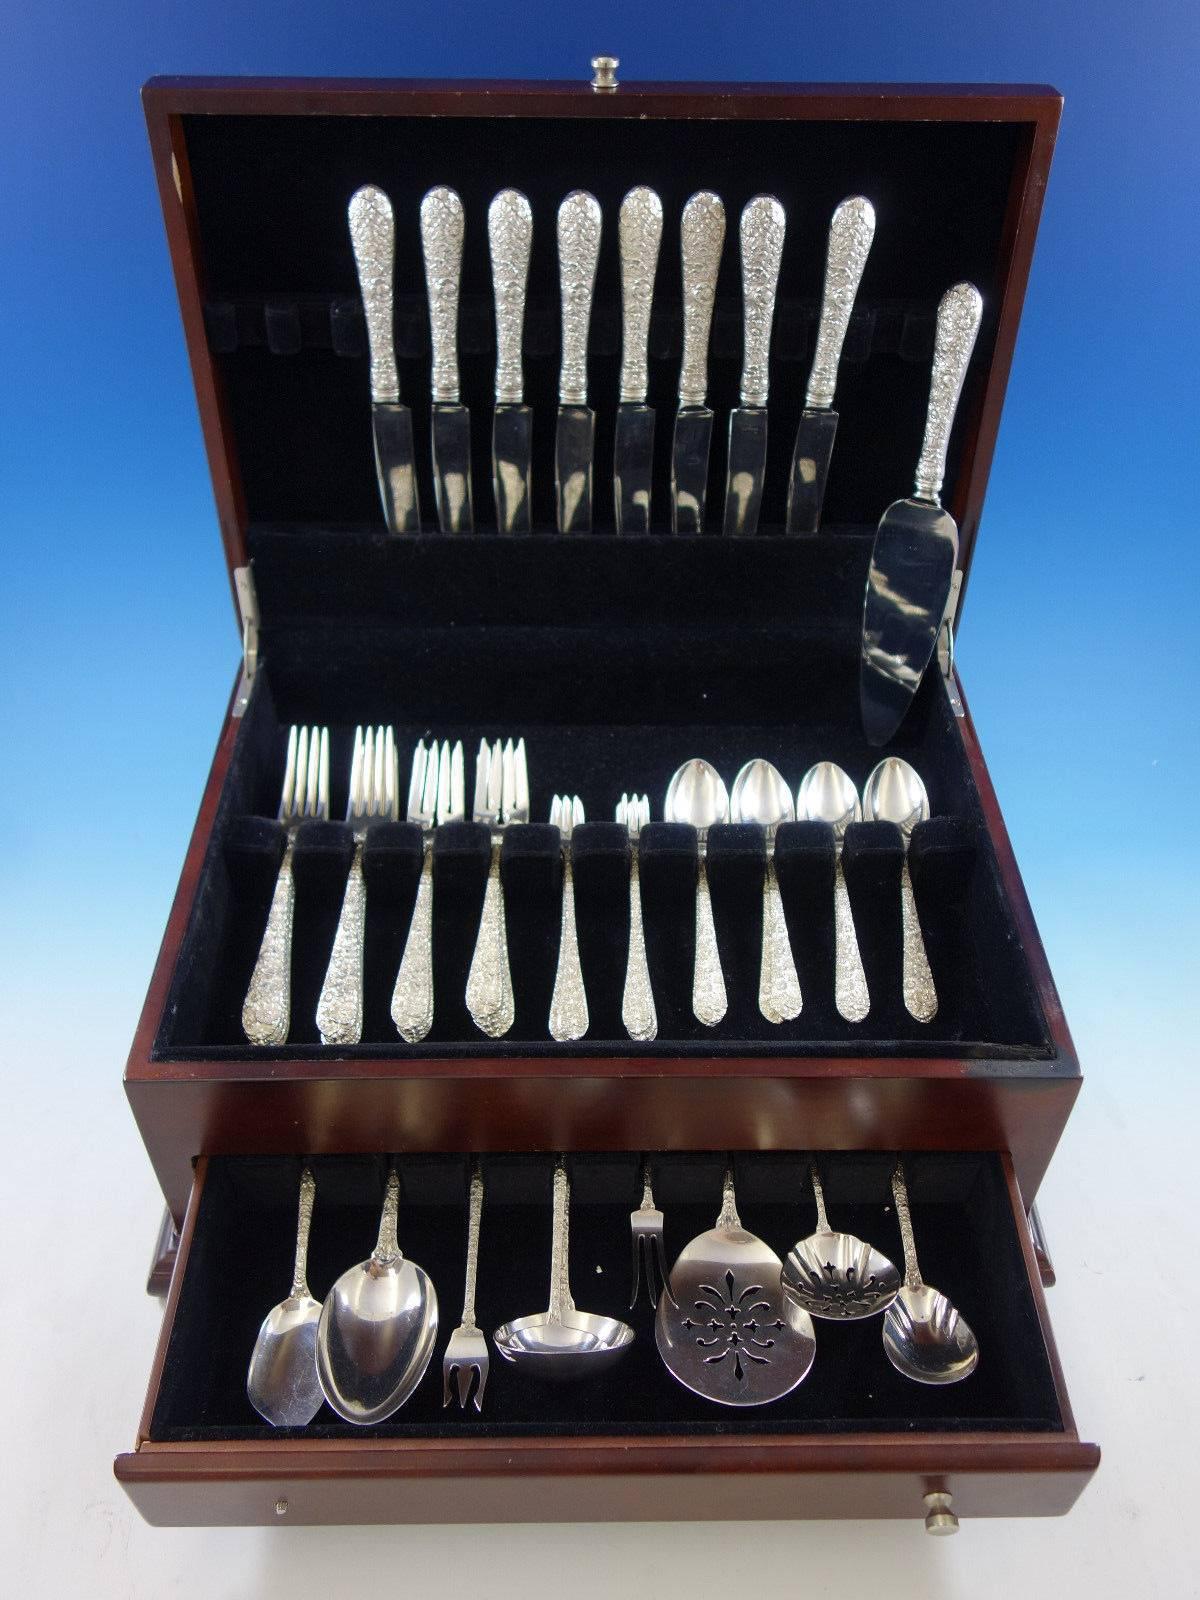 Bridal Bouquet by Alvin repousse sterling silver flatware set of 50 pieces. This set includes: 

Eight knives, 9